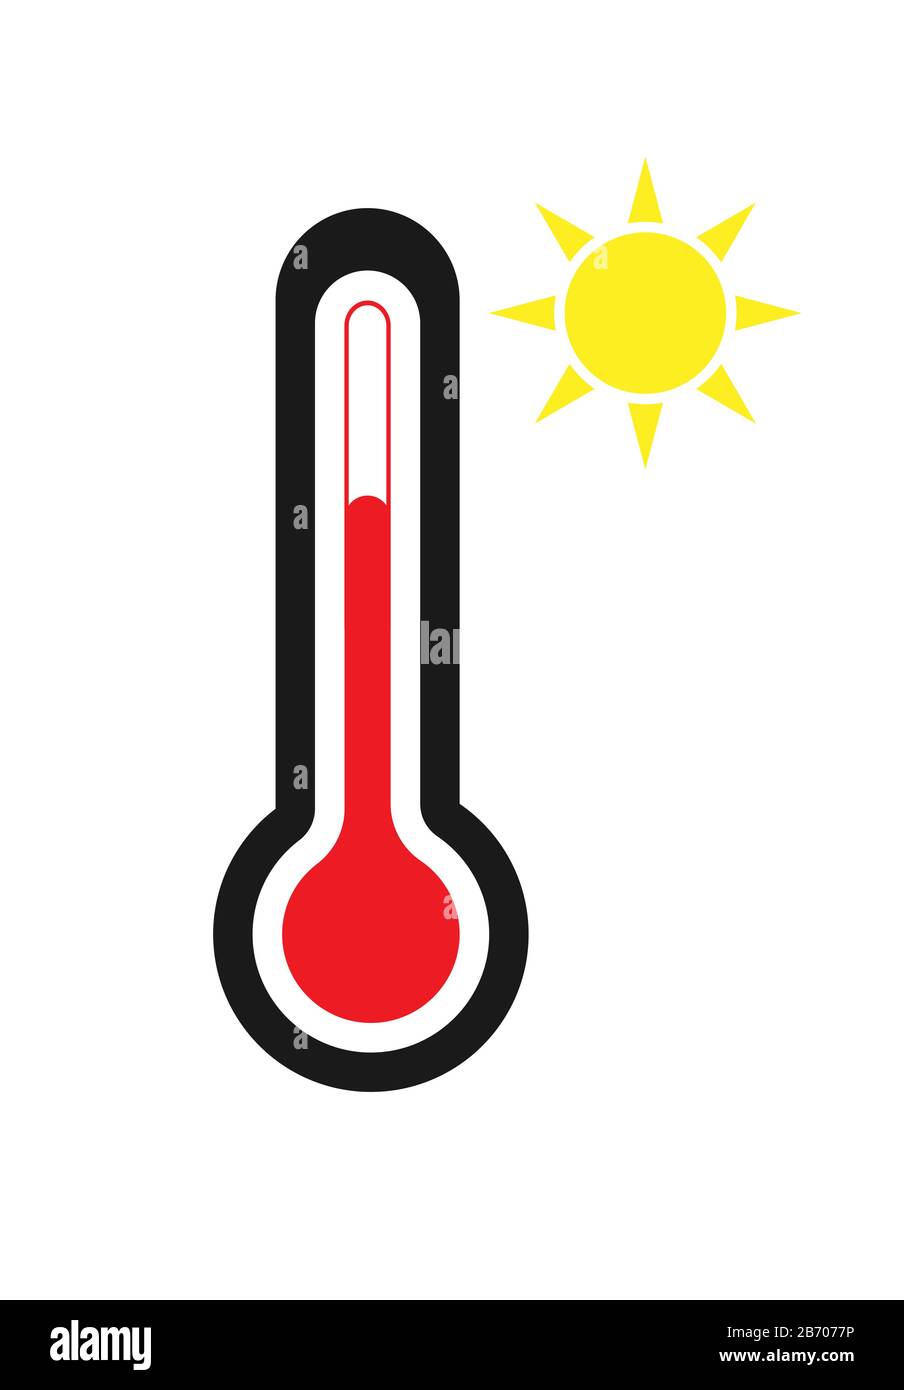 Thermometer with high temperature icon flat style Vector Image